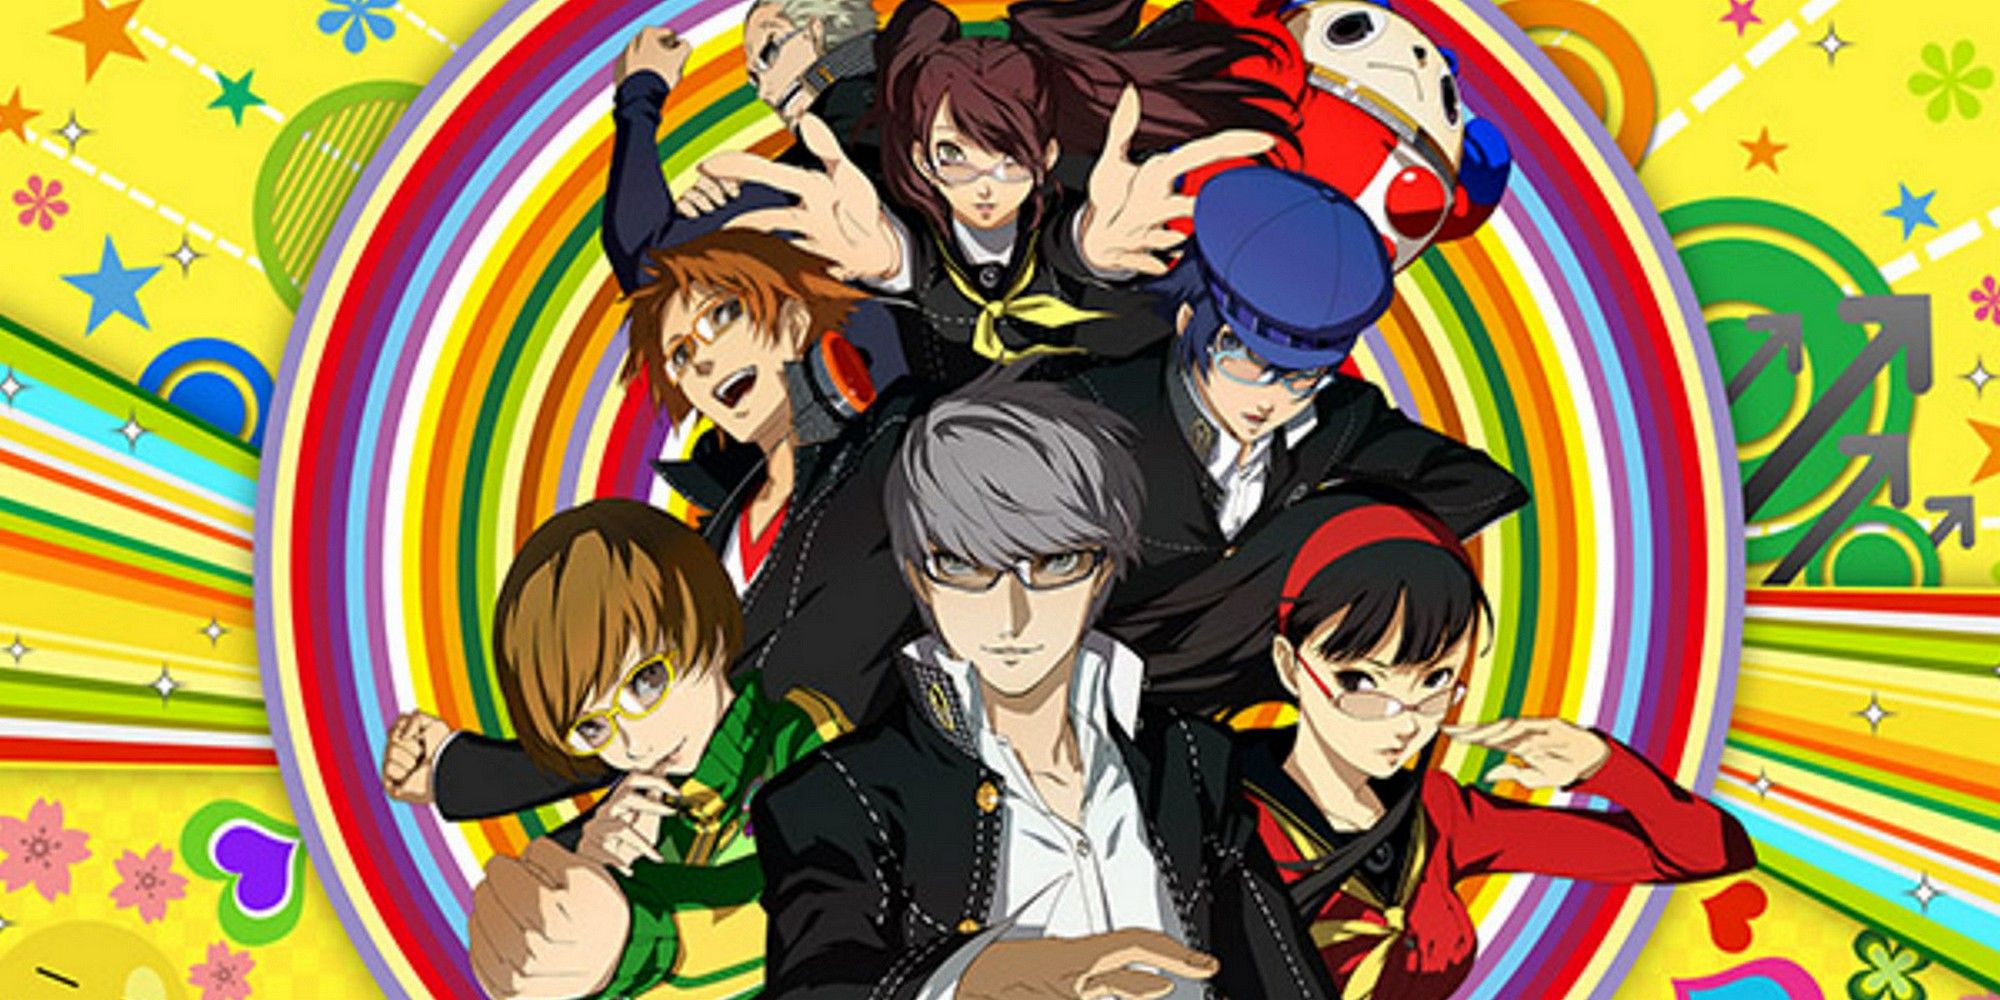 A compilation of all the characters from the investigation team of Persona 4 Golden